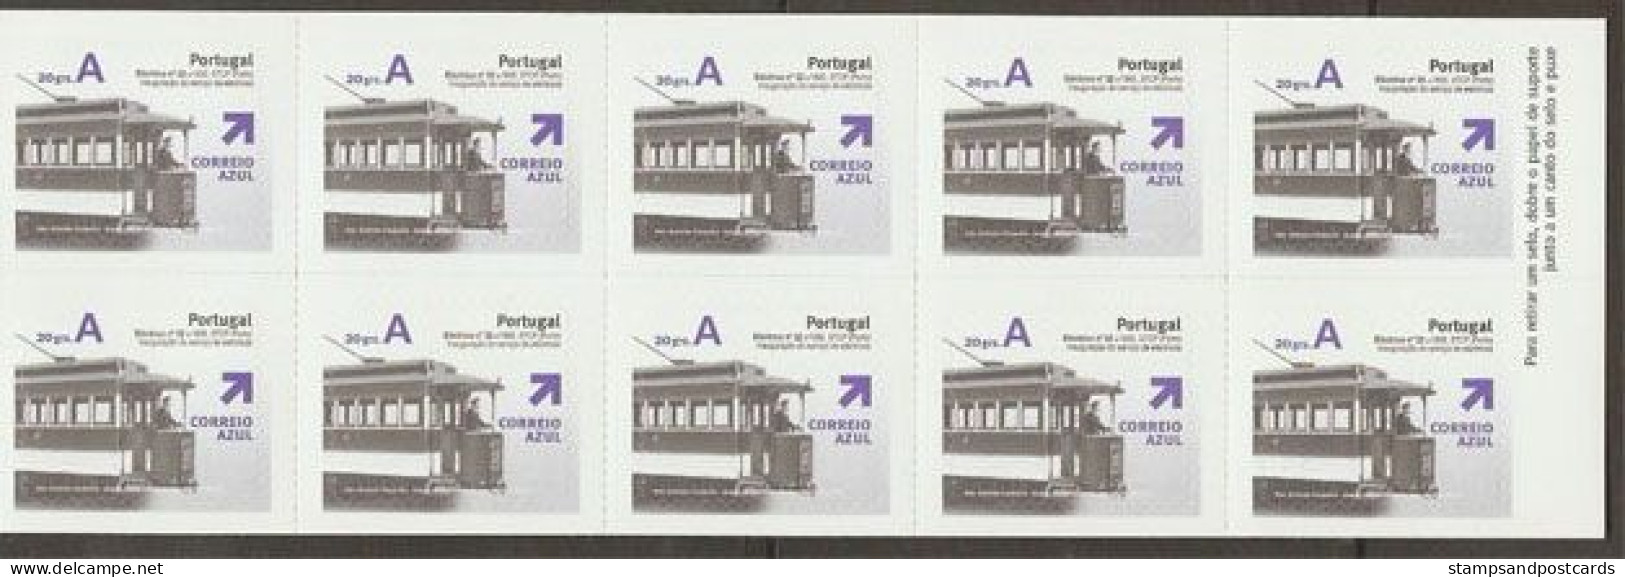 Portugal Carnet Autocollant 2007 Tram 1895 Oporto 50 Timbres 2007 Sticker Stamp Booklet Oporto Tramway 50 Stamps *** - Tram